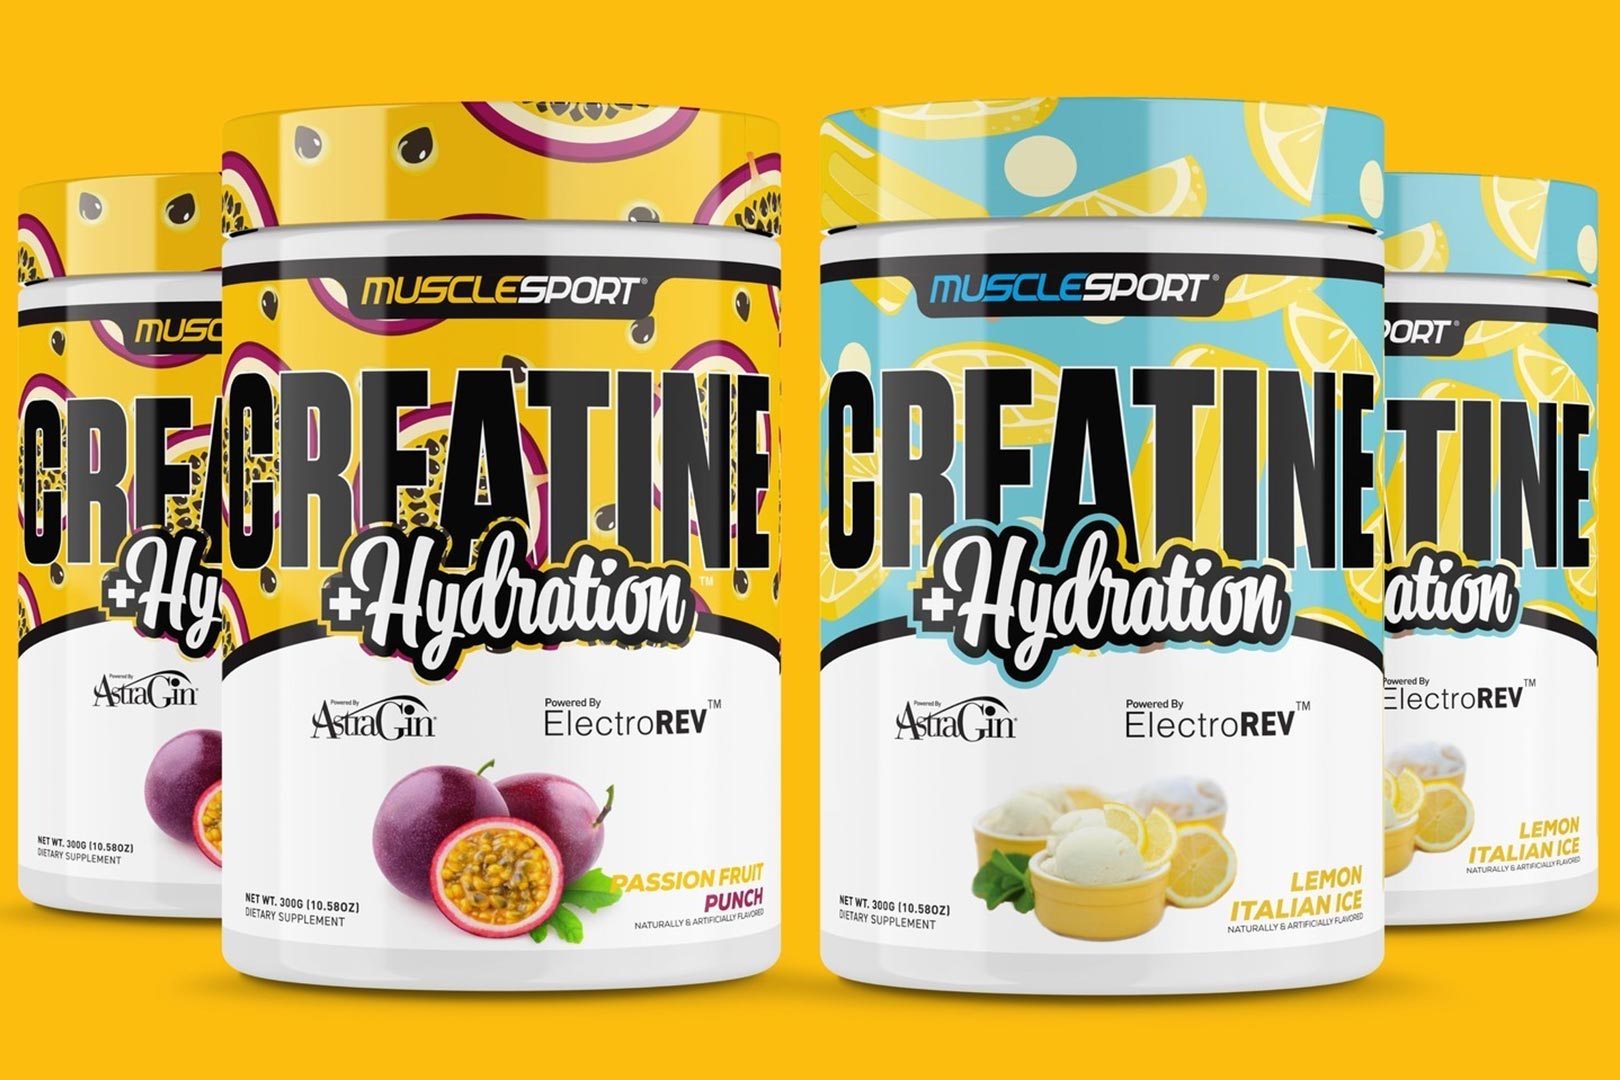 Muscle Sport Creatine Hydration